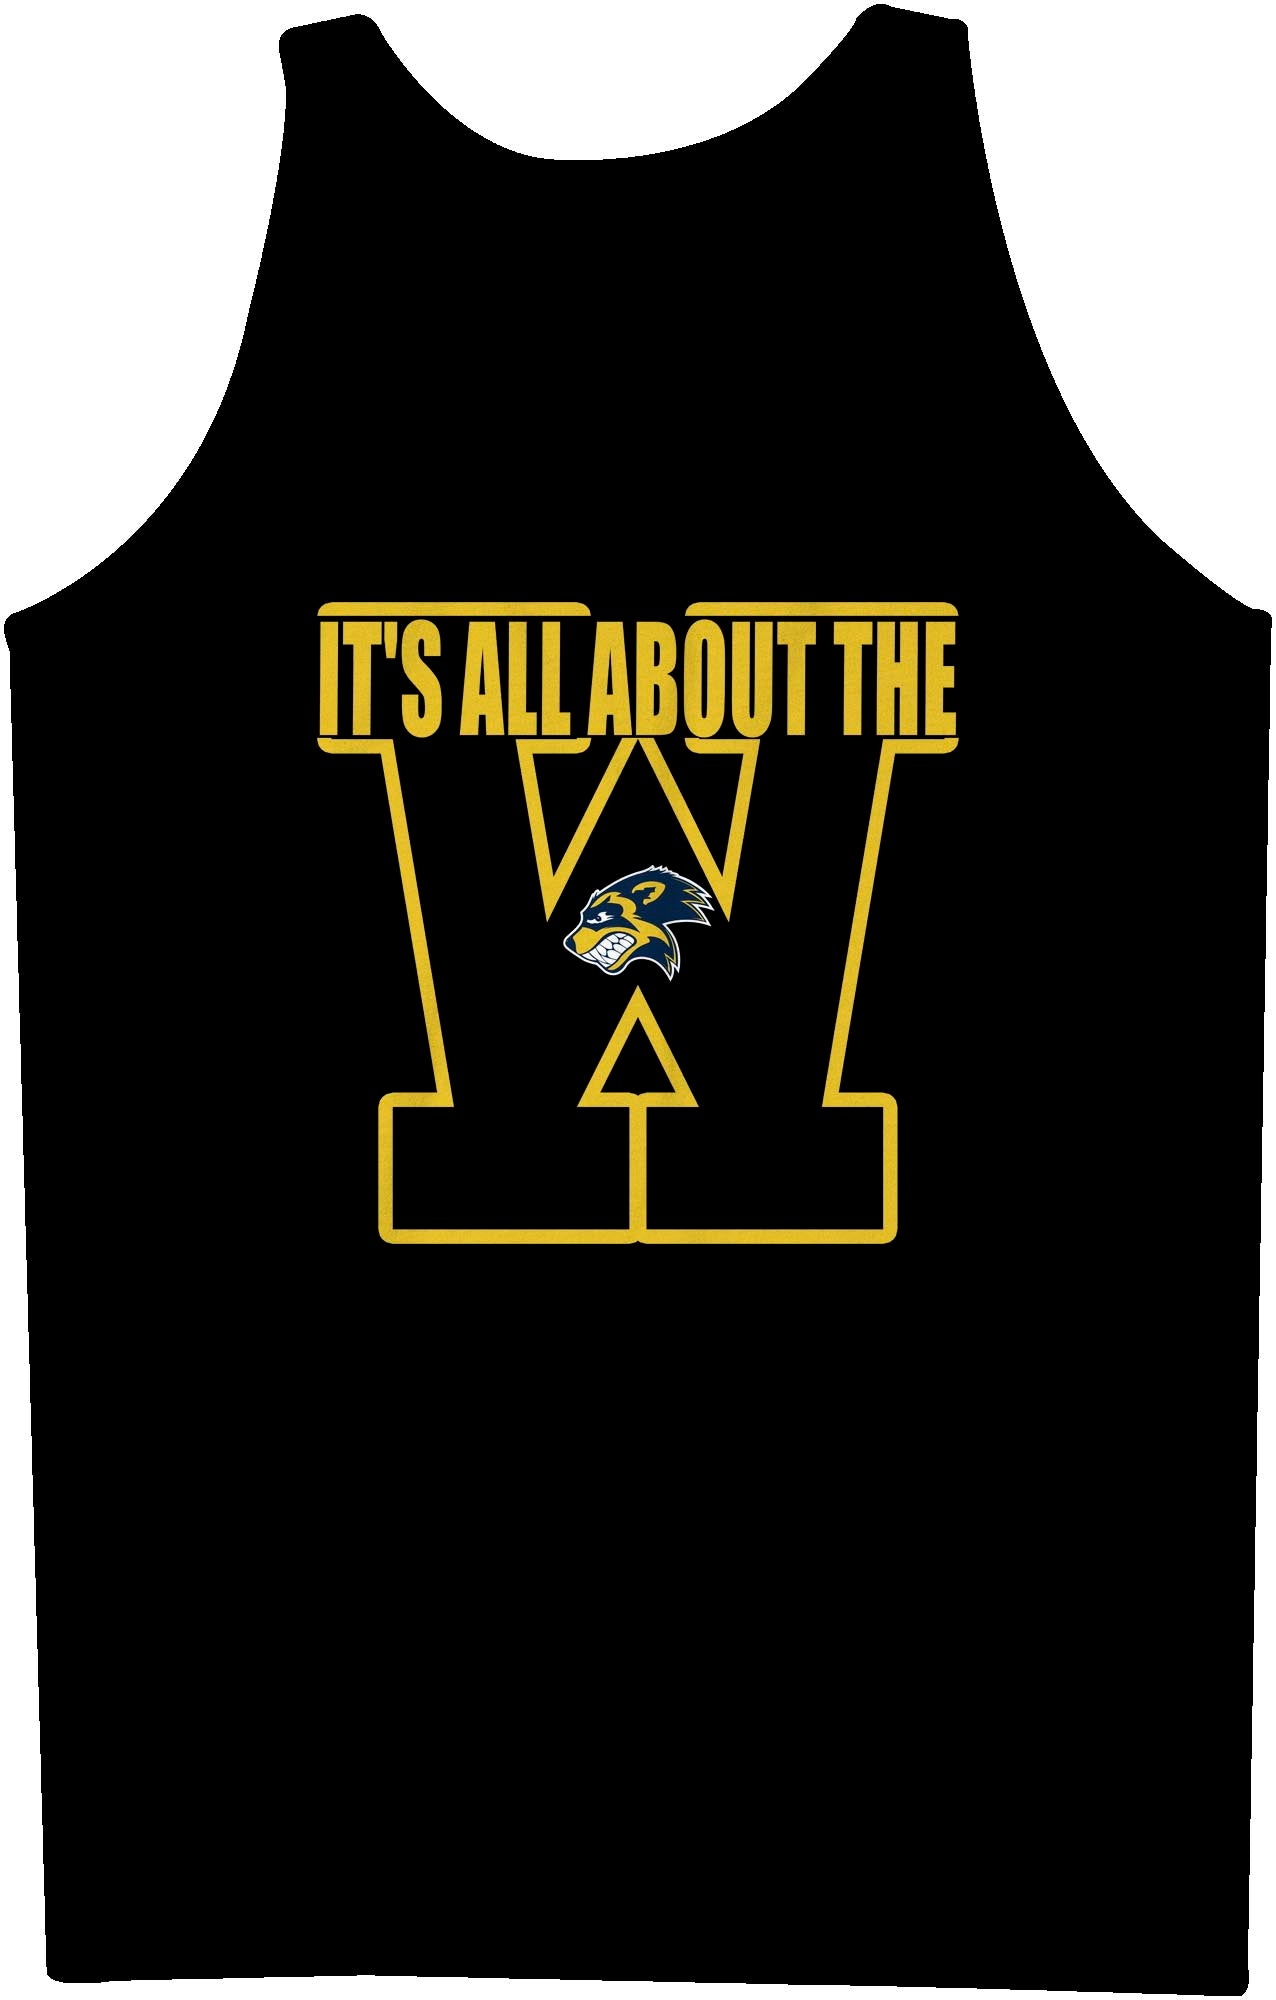 It's All About The W Singlet